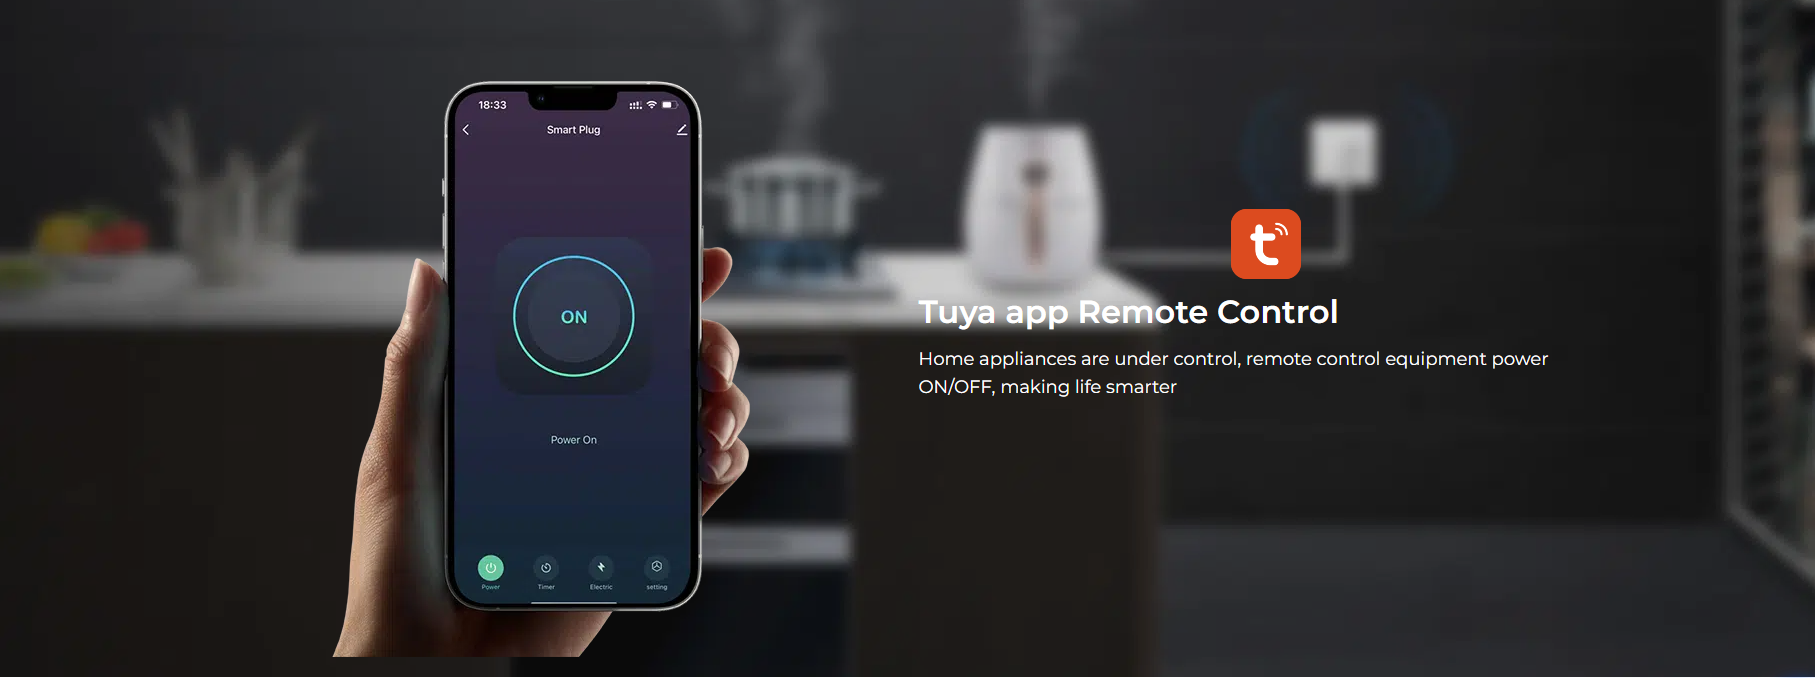 Tuya app Remote Control Home appliances are under control, remote control equipment power ON/OFF, making life smarter